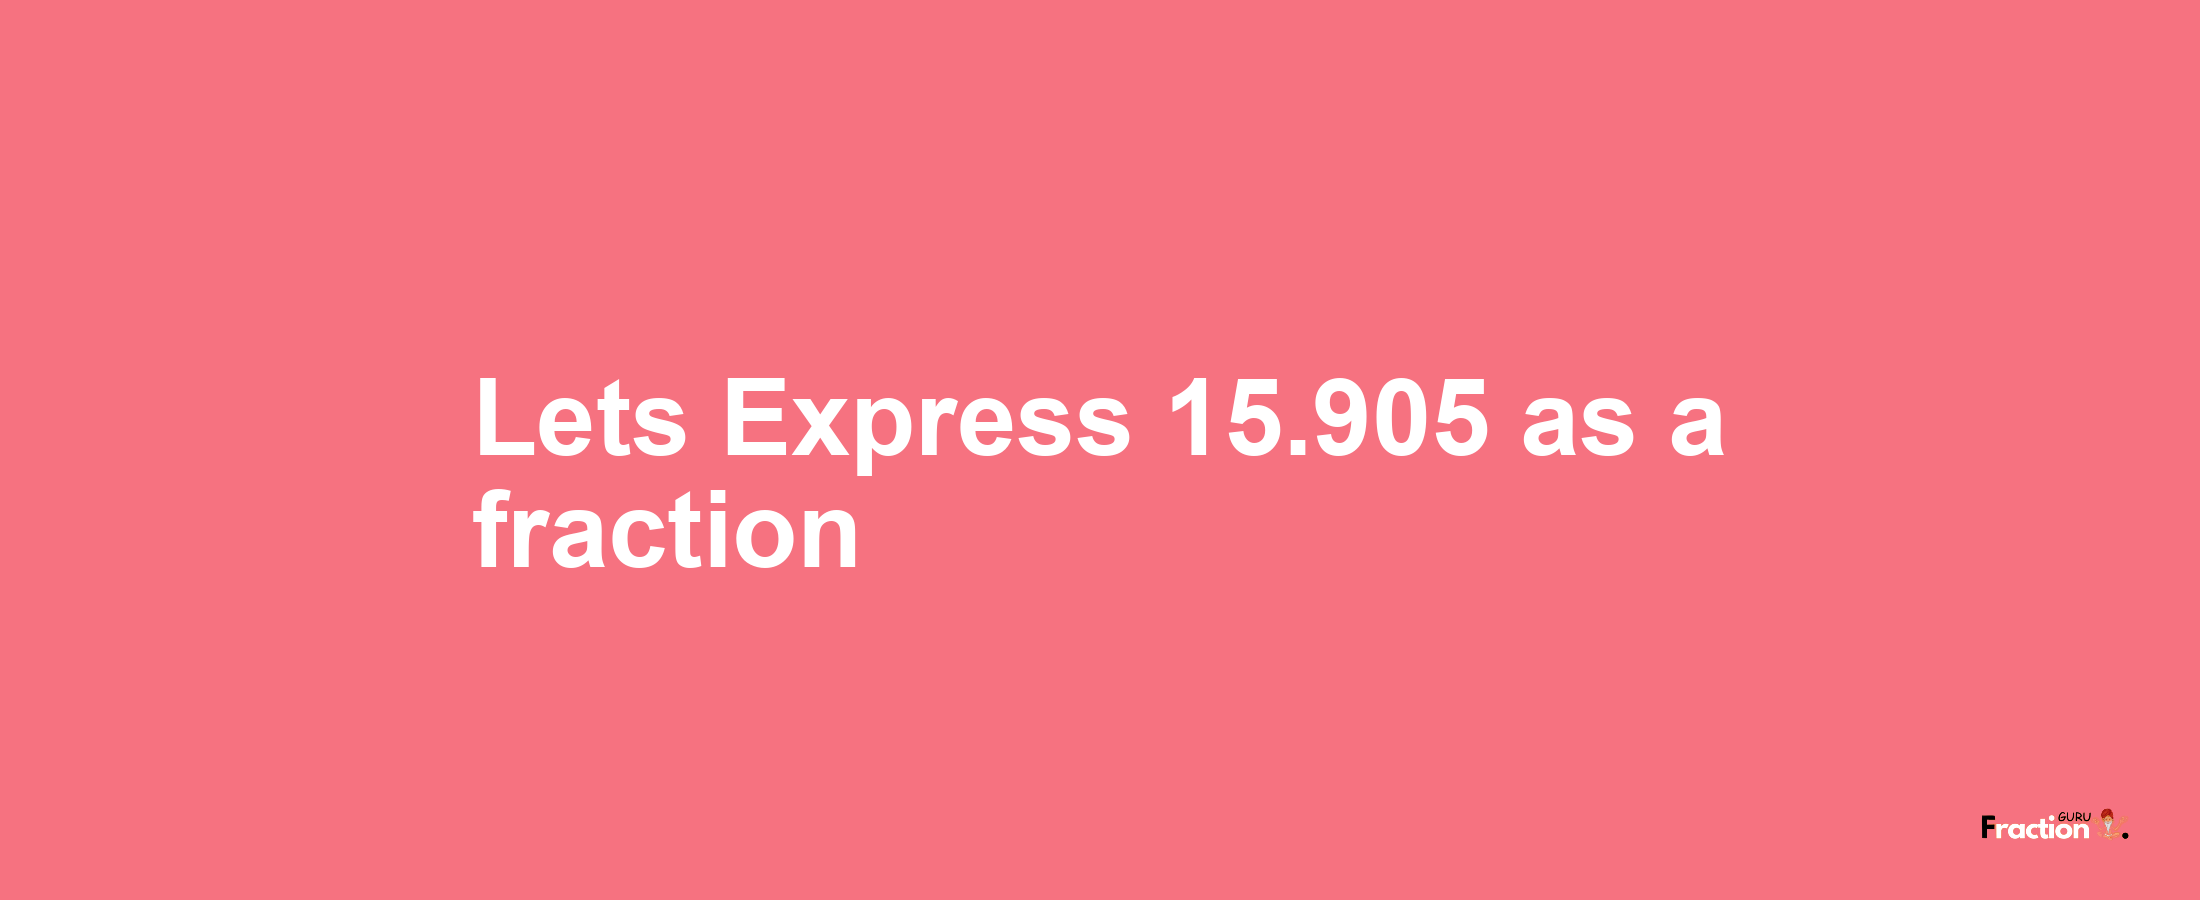 Lets Express 15.905 as afraction